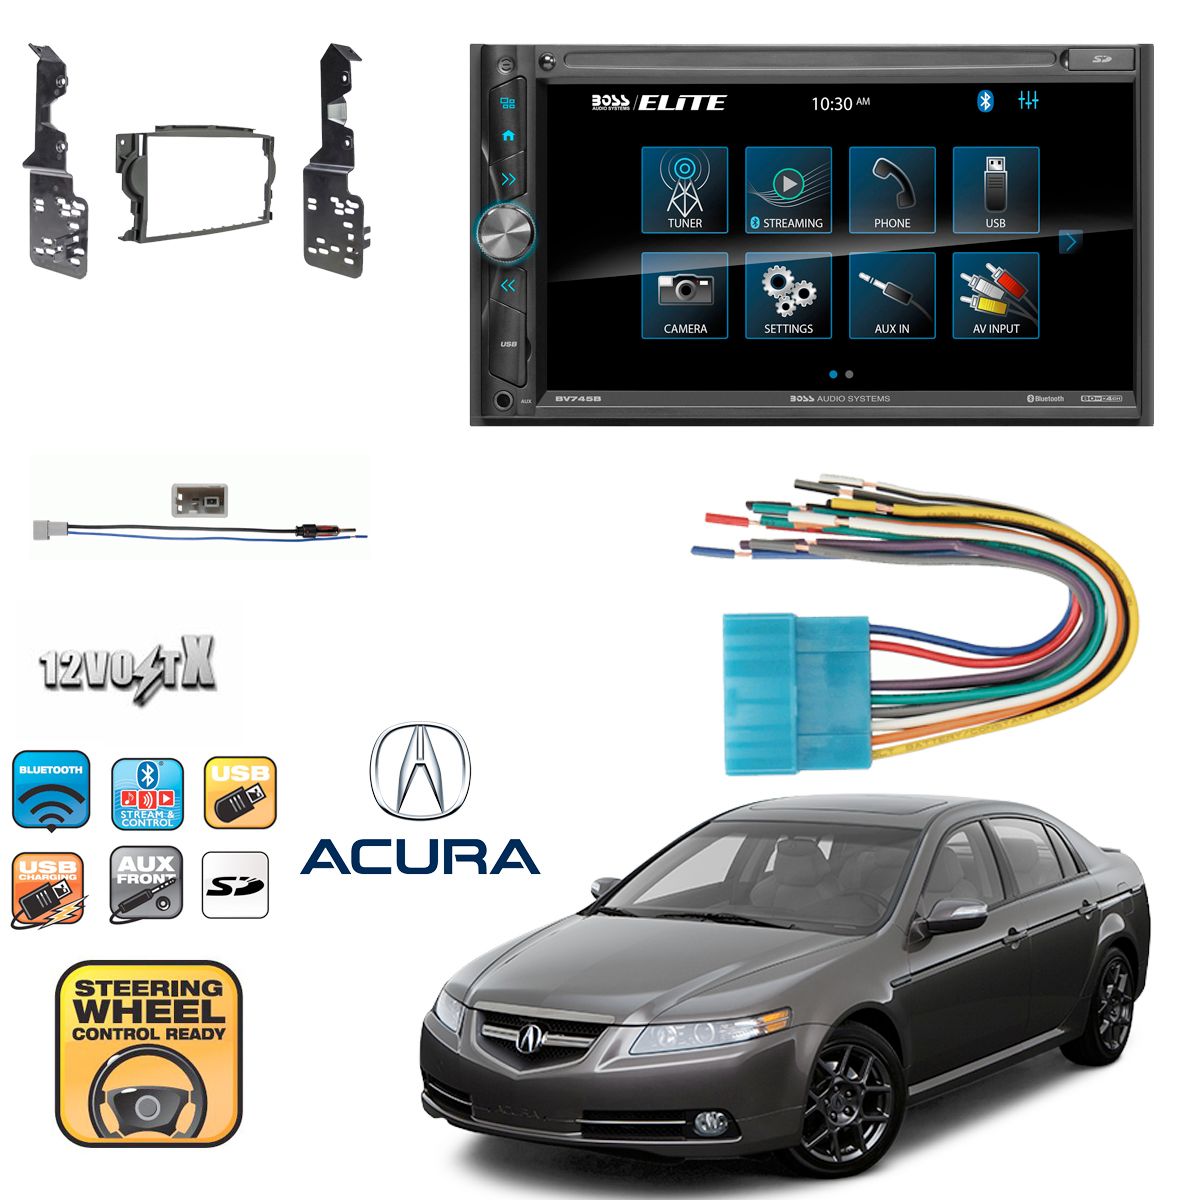 2-DIN 6.95" Touchscreen Bluetooth For Acura TL 2007-2008 with install parts